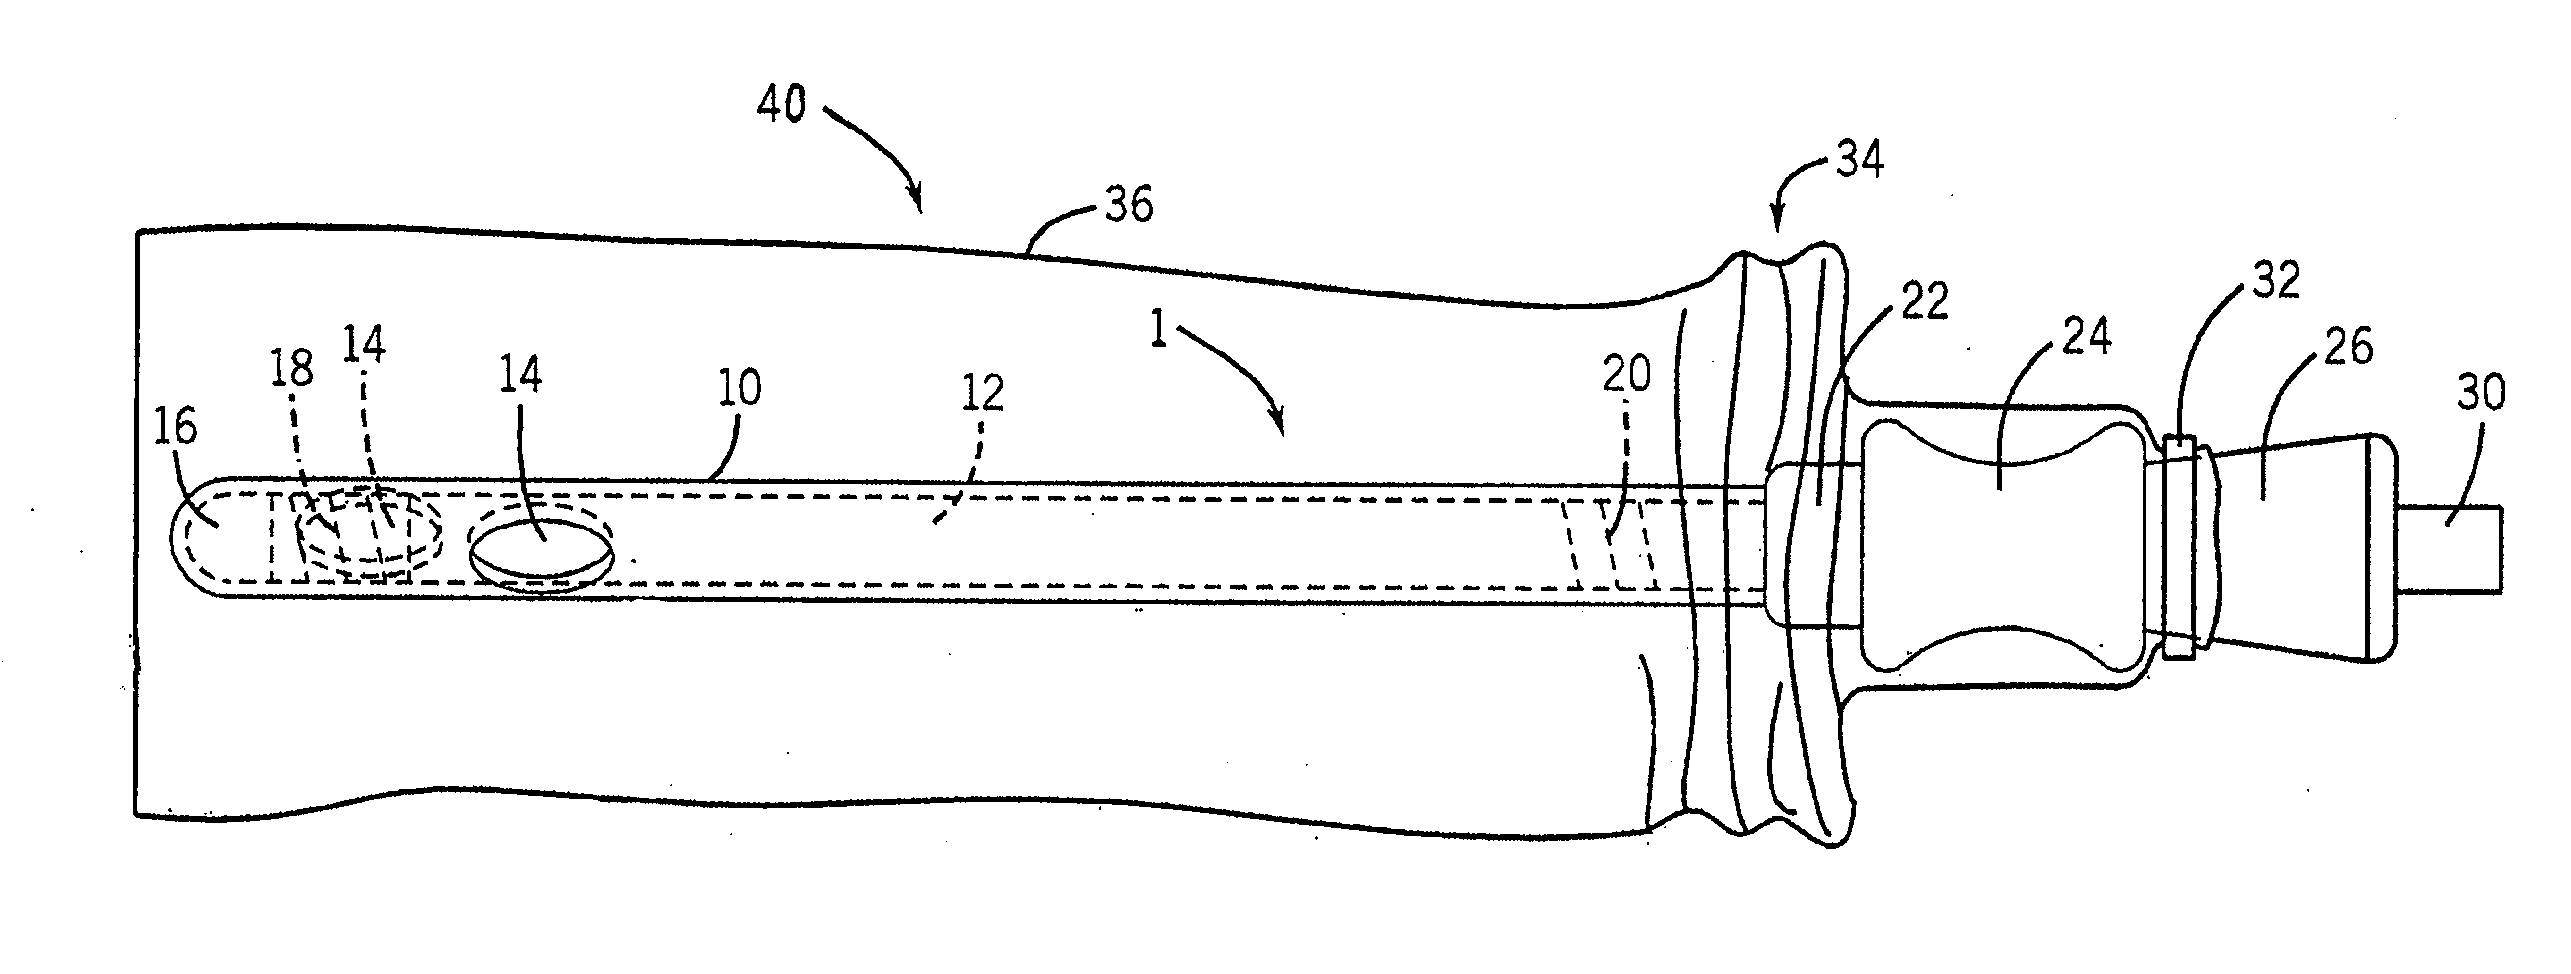 Catheter Having Internal Hydrating Fluid Storage and/or Catheter Package Using the Same and Method of Making and/or Using the Same